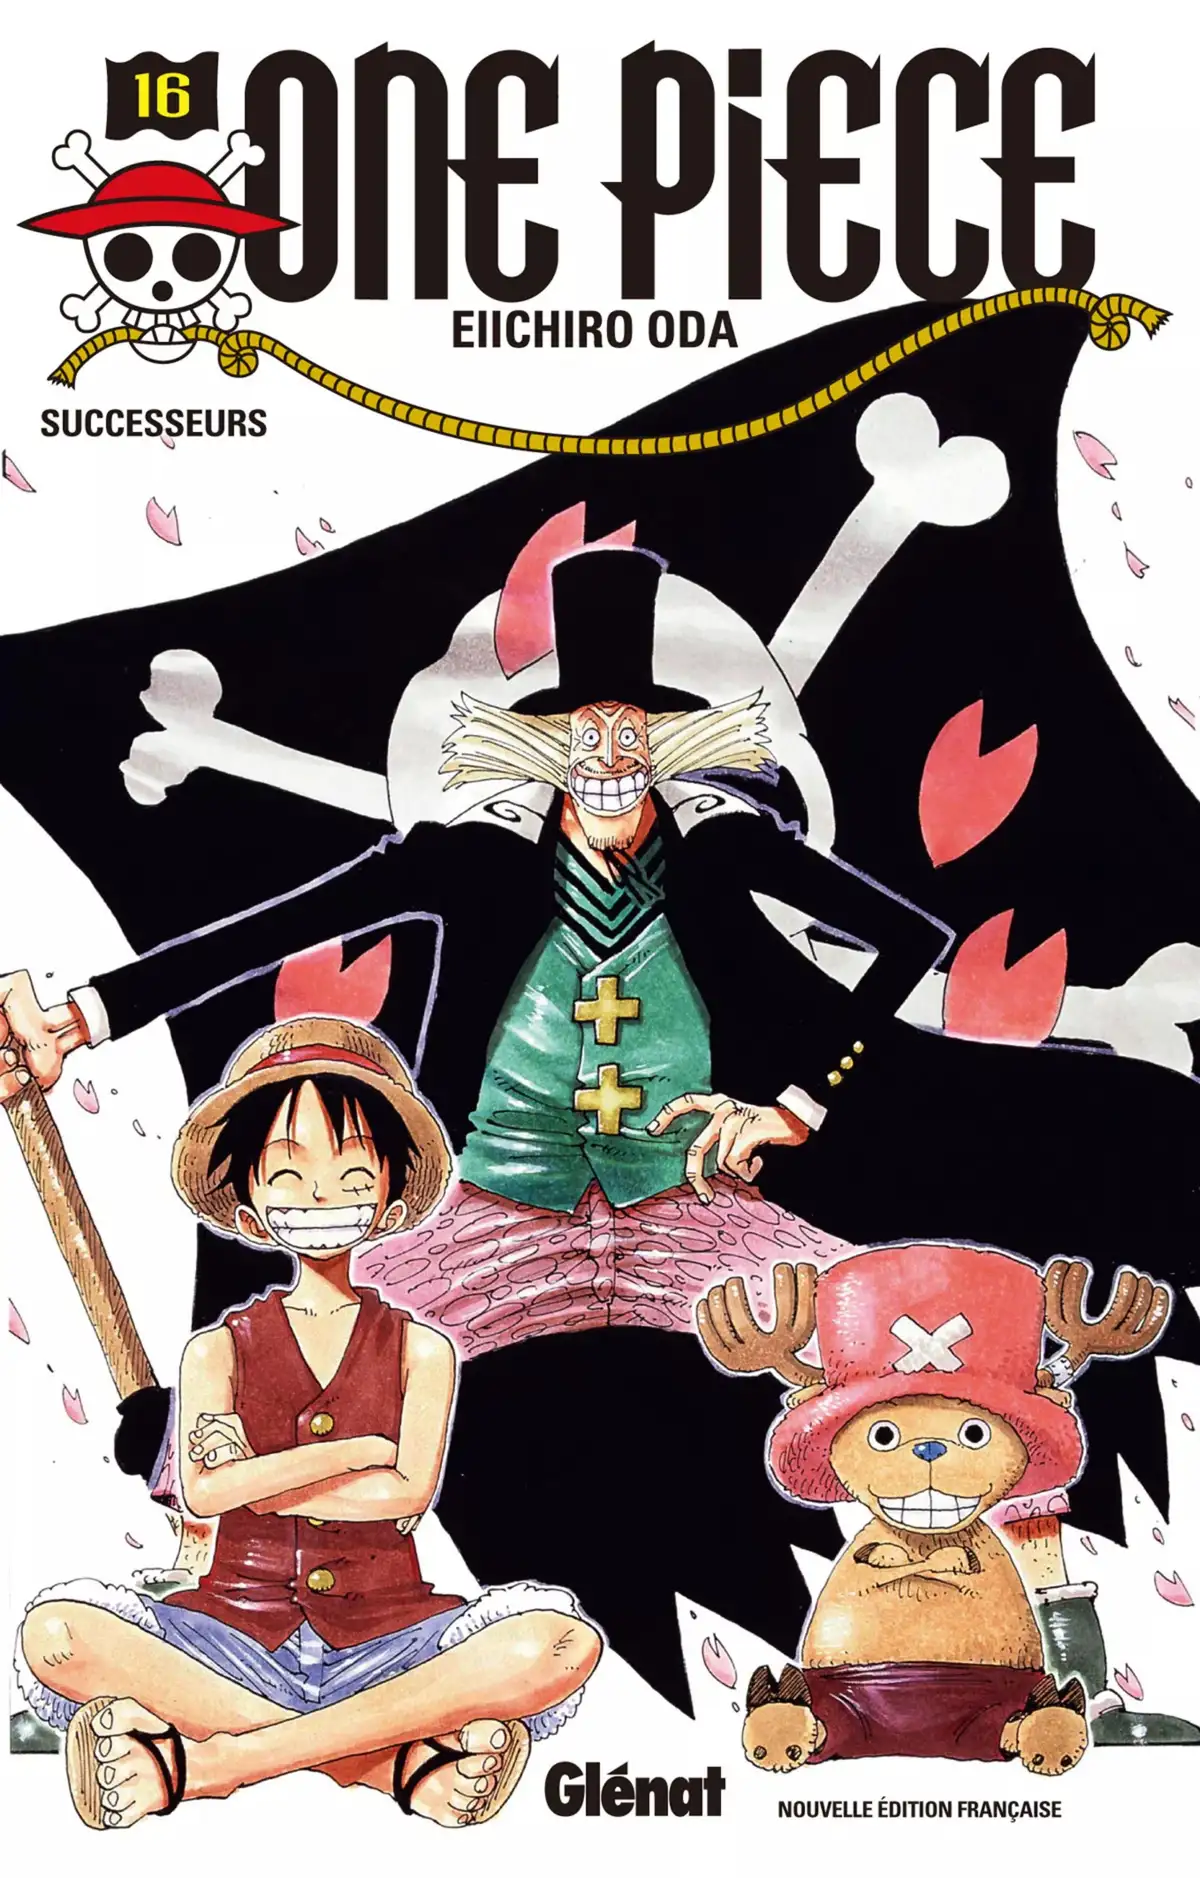 One Piece Volume 16 page 1